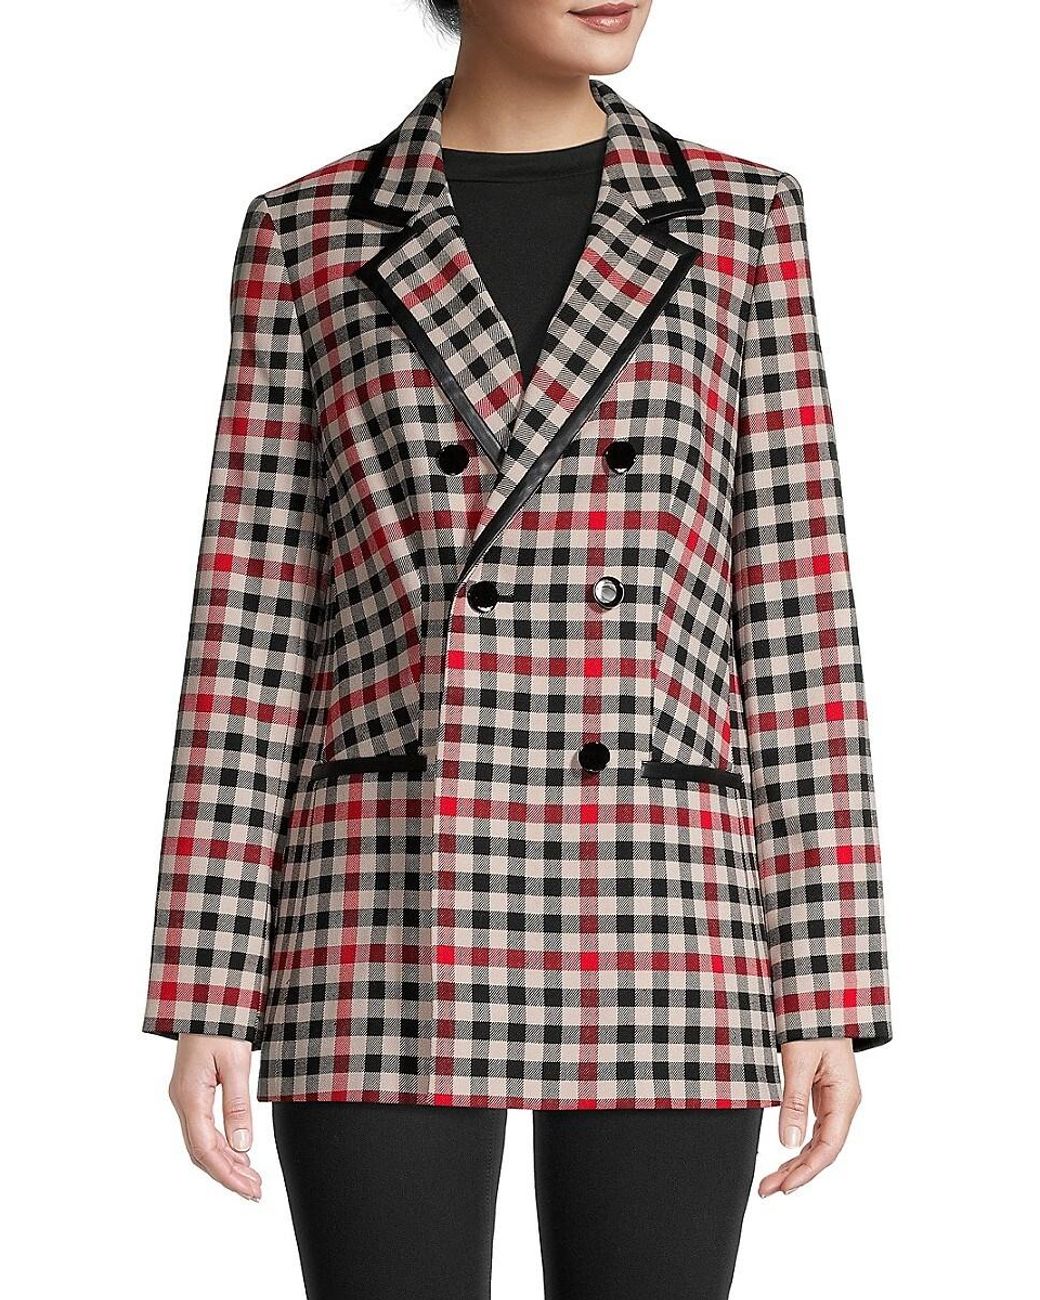 Karl Lagerfeld Plaid Double-breasted Jacket in Black | Lyst